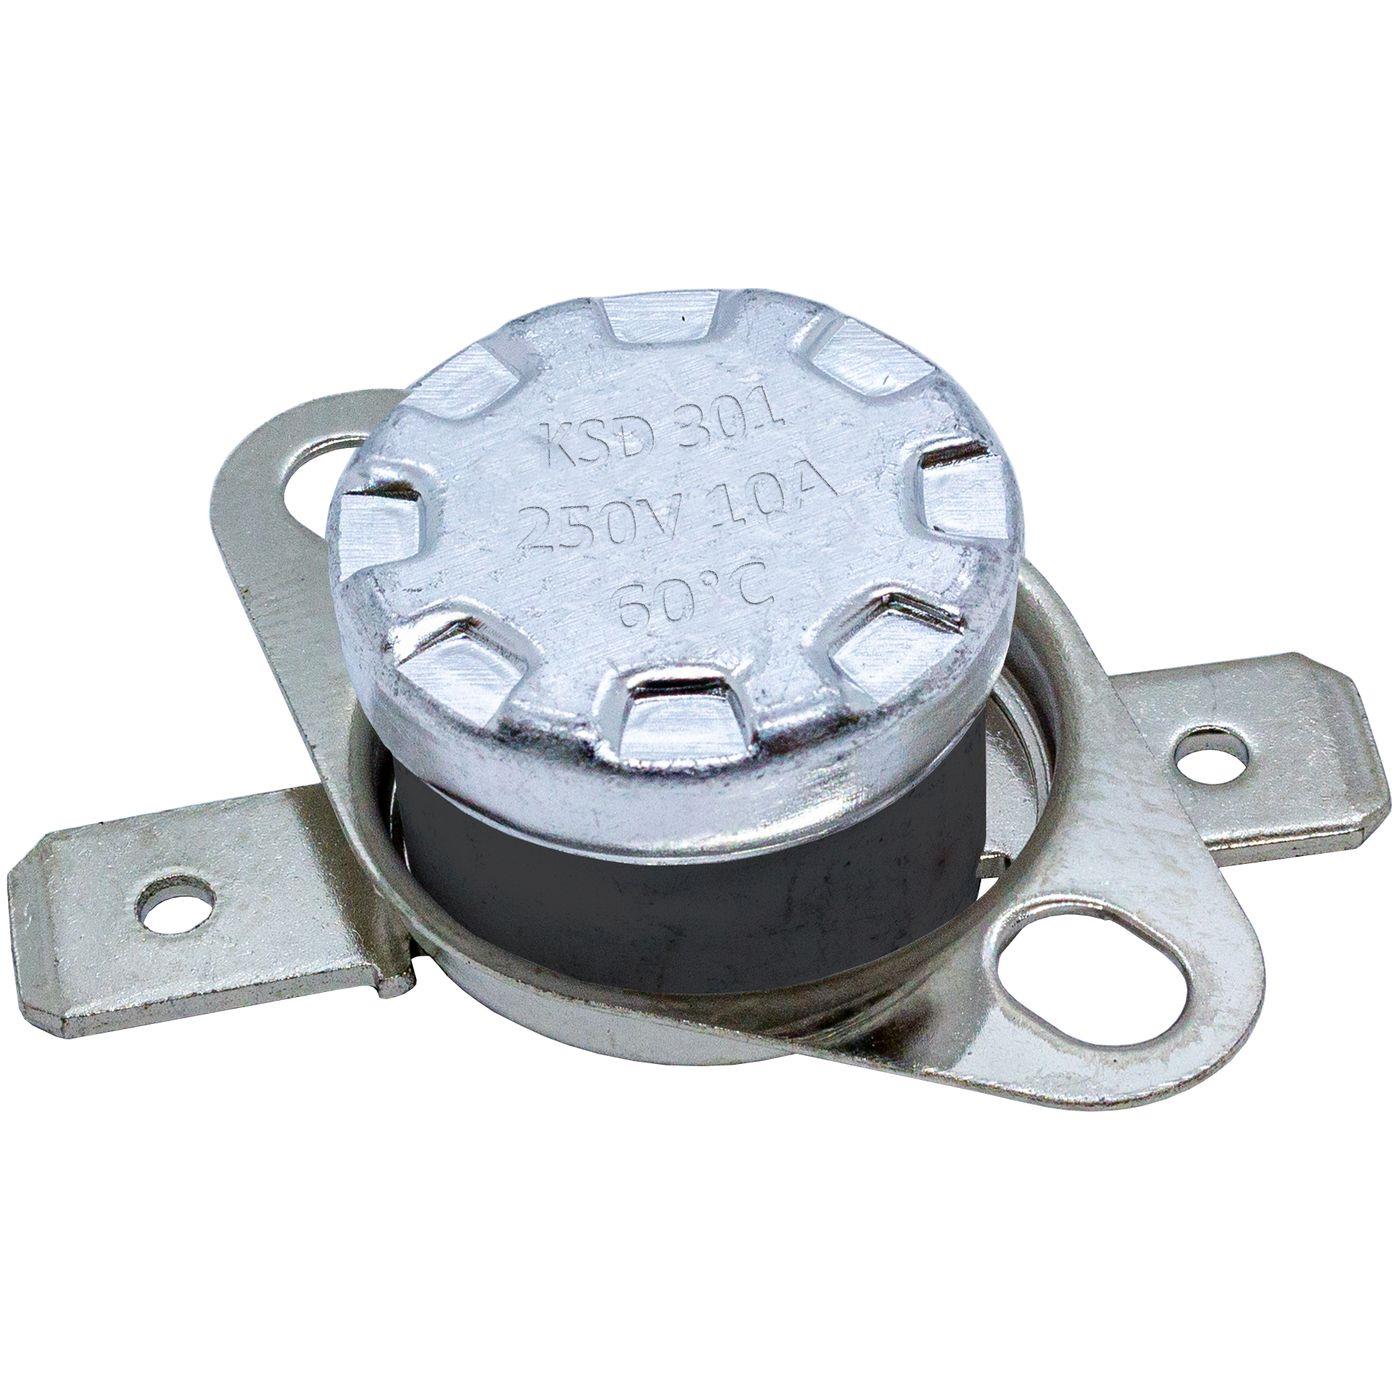 Thermal switch 60°C NC contact 250V 10A Temperature switch thermostat KSD301 Bimetal Thermal protection